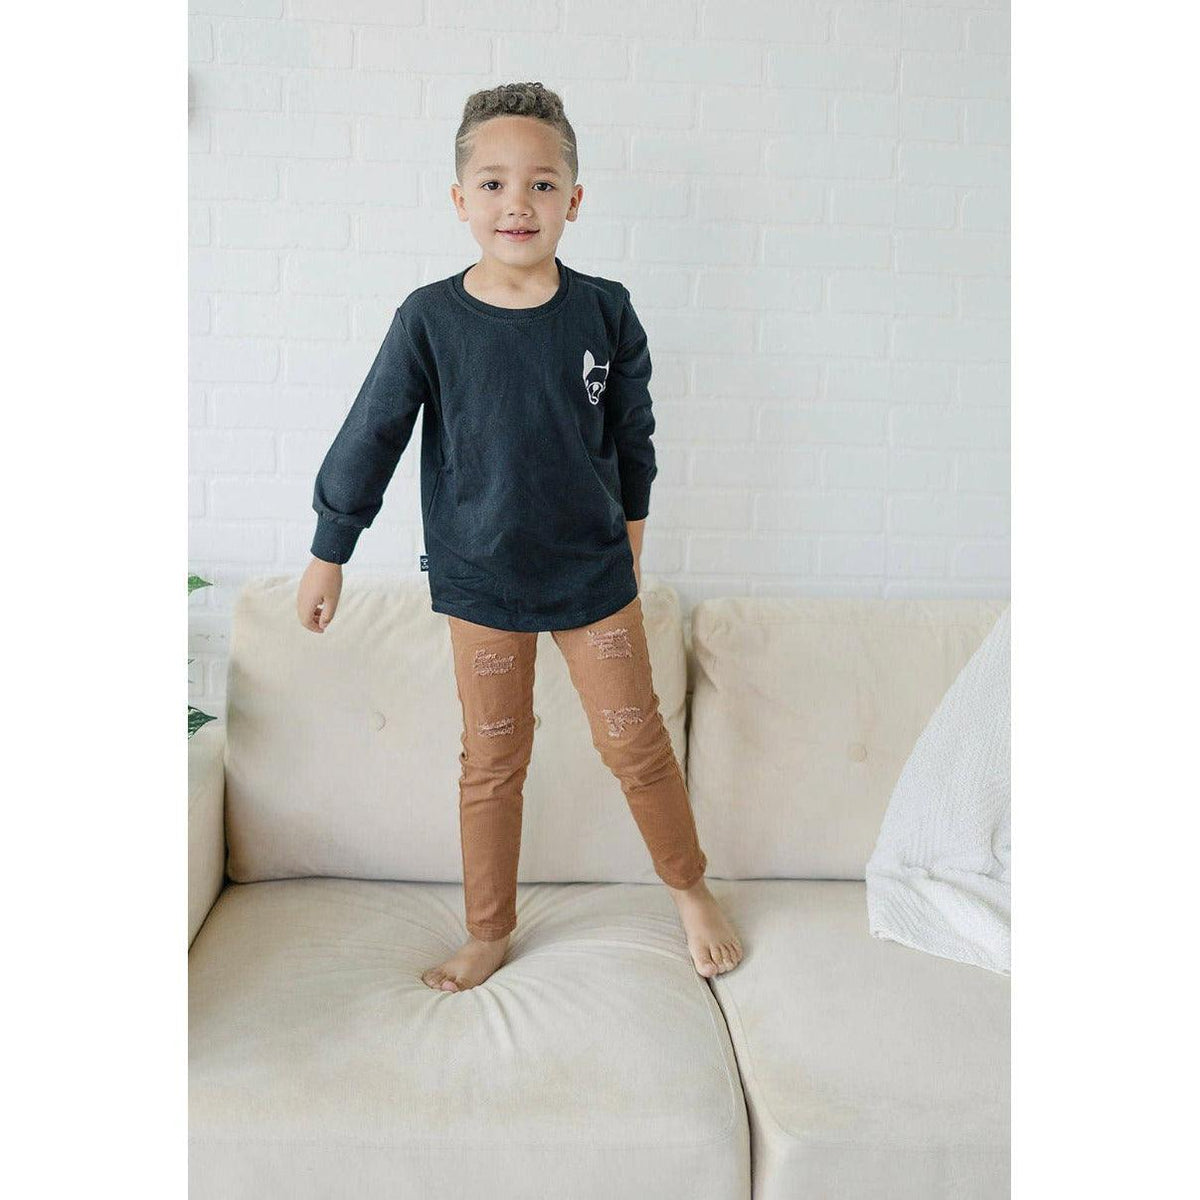 Olive+Scout | Ashton Ripped Brown Jeans | Toddler - becauseofadi